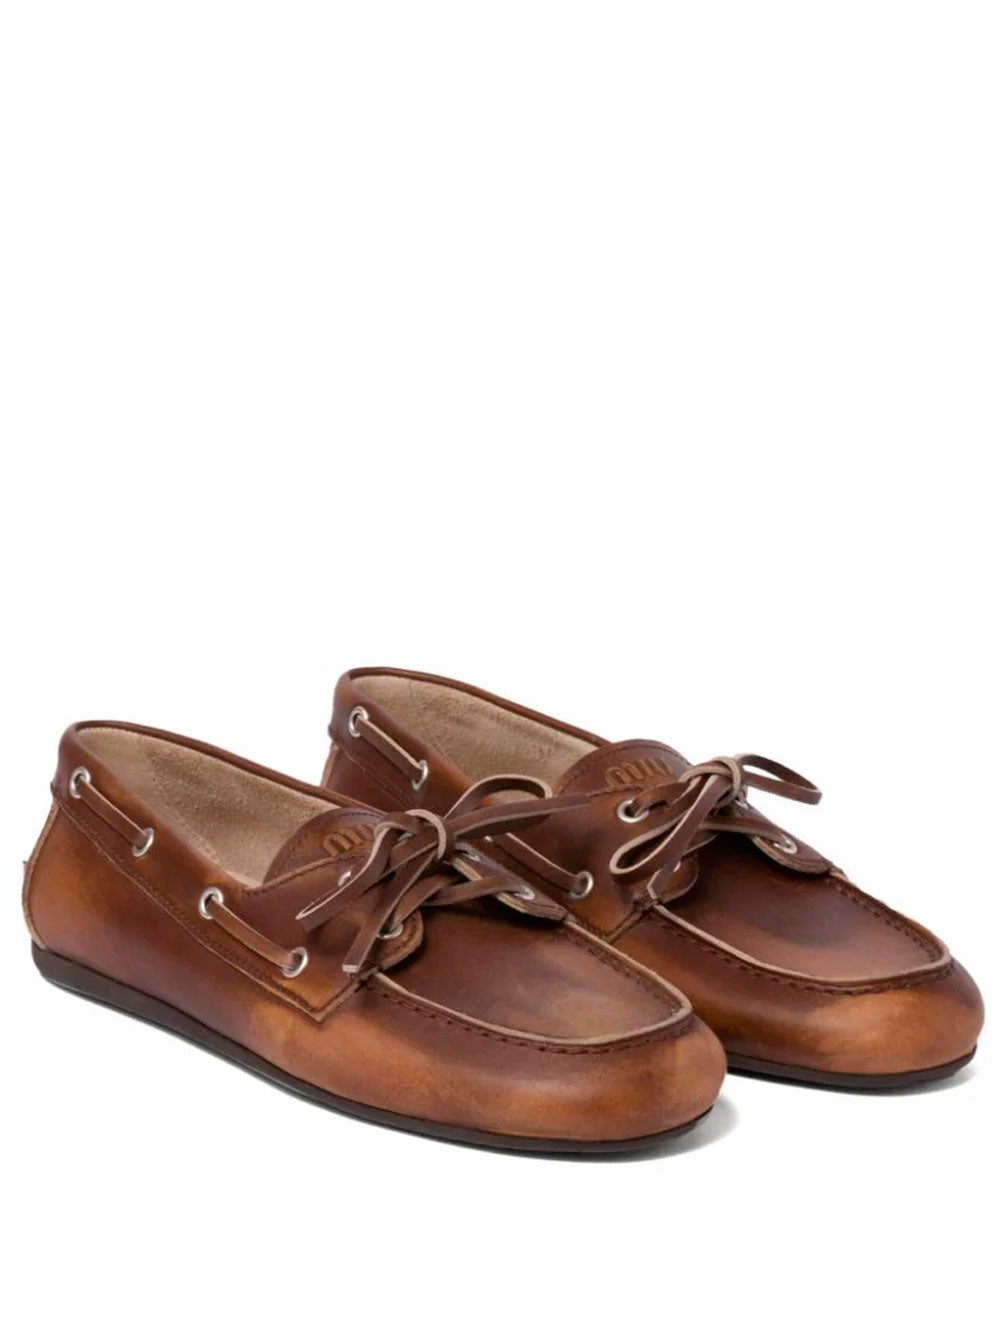 Bleached leather loafers